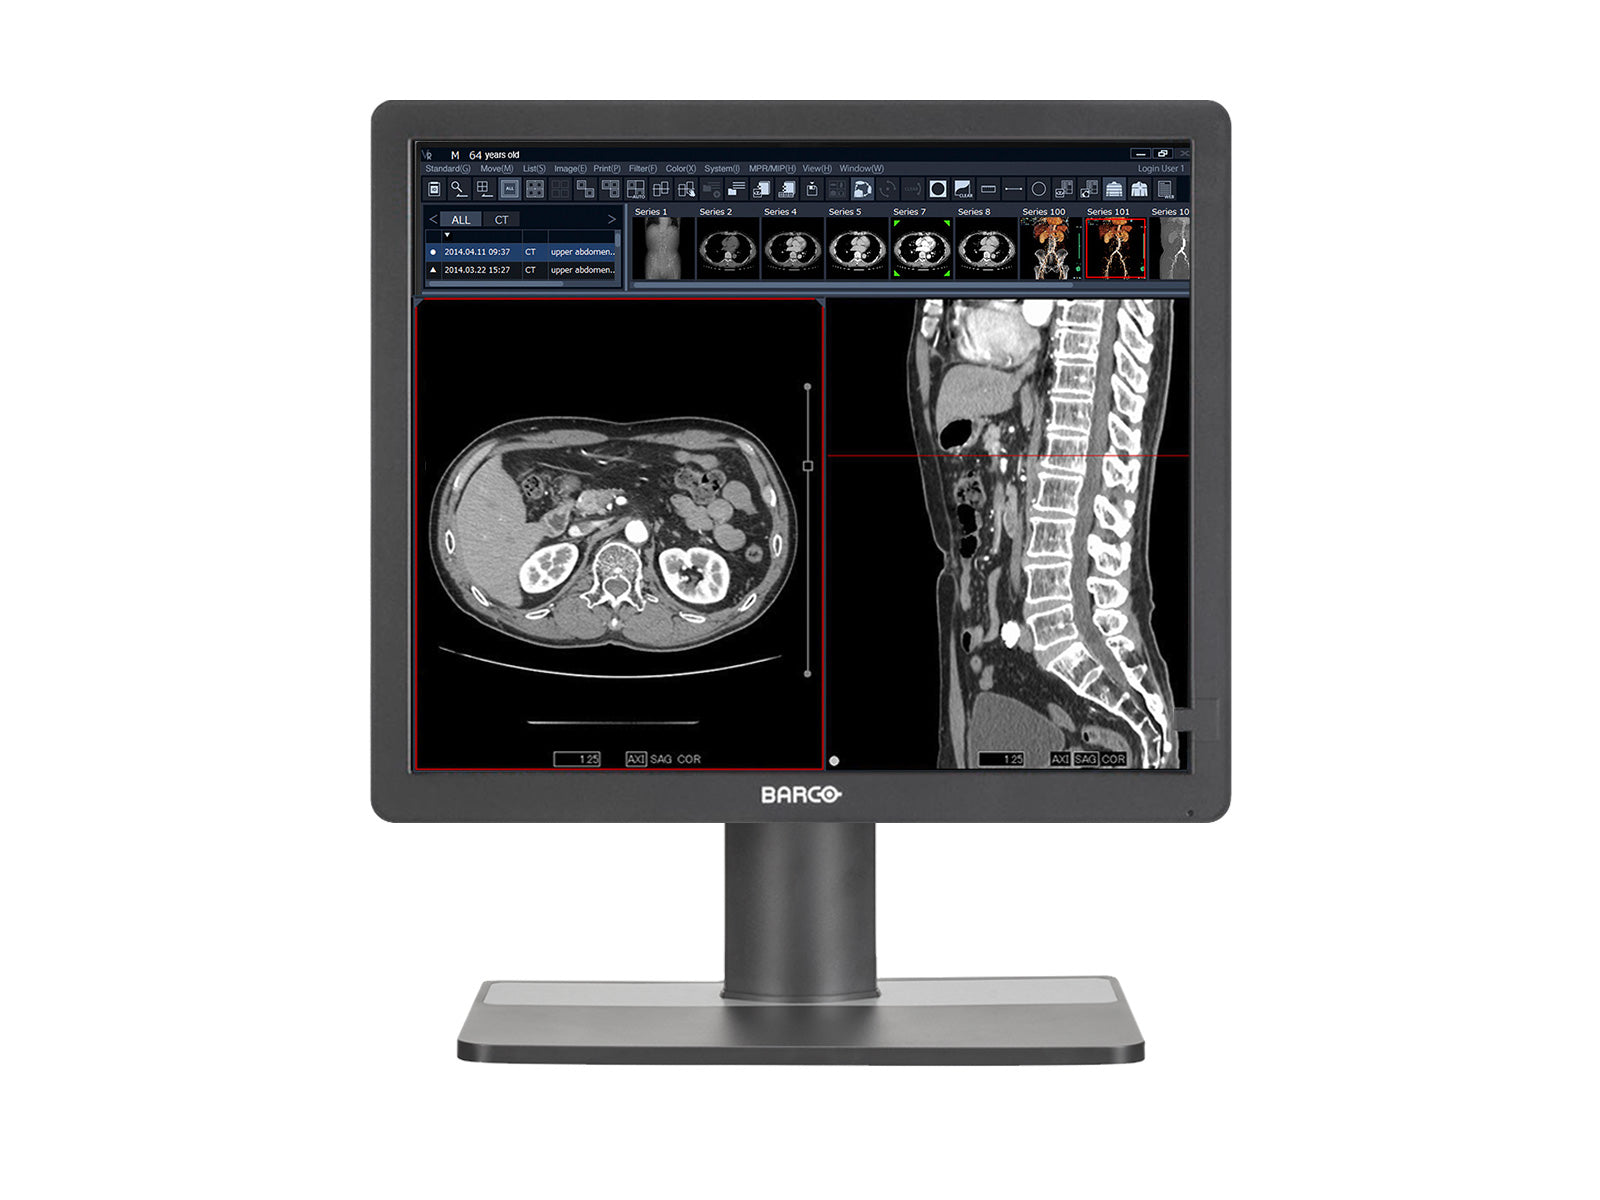 Barco MDRC-1219 1MP 19" Color Clinical Review Display Monitors.com 